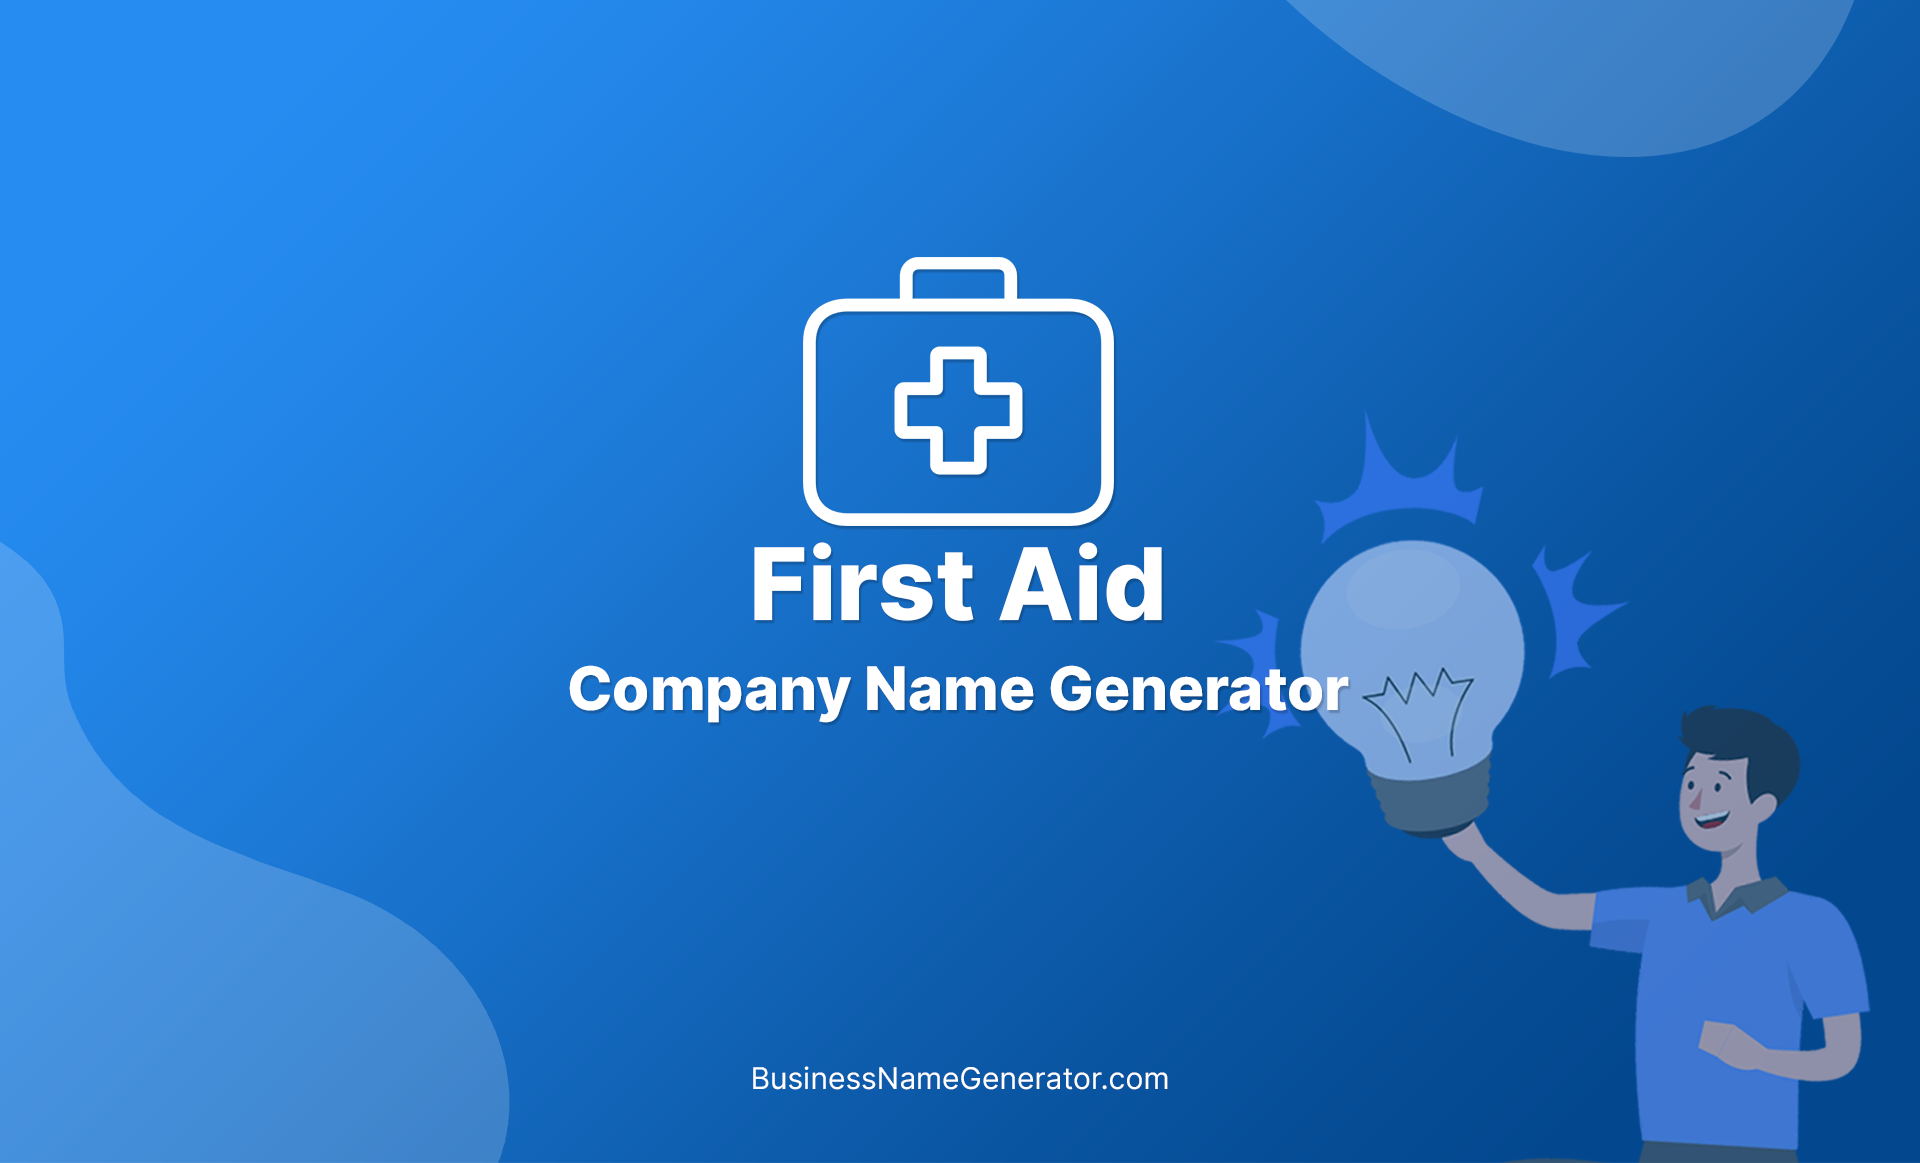 First Aid Company Name Generator